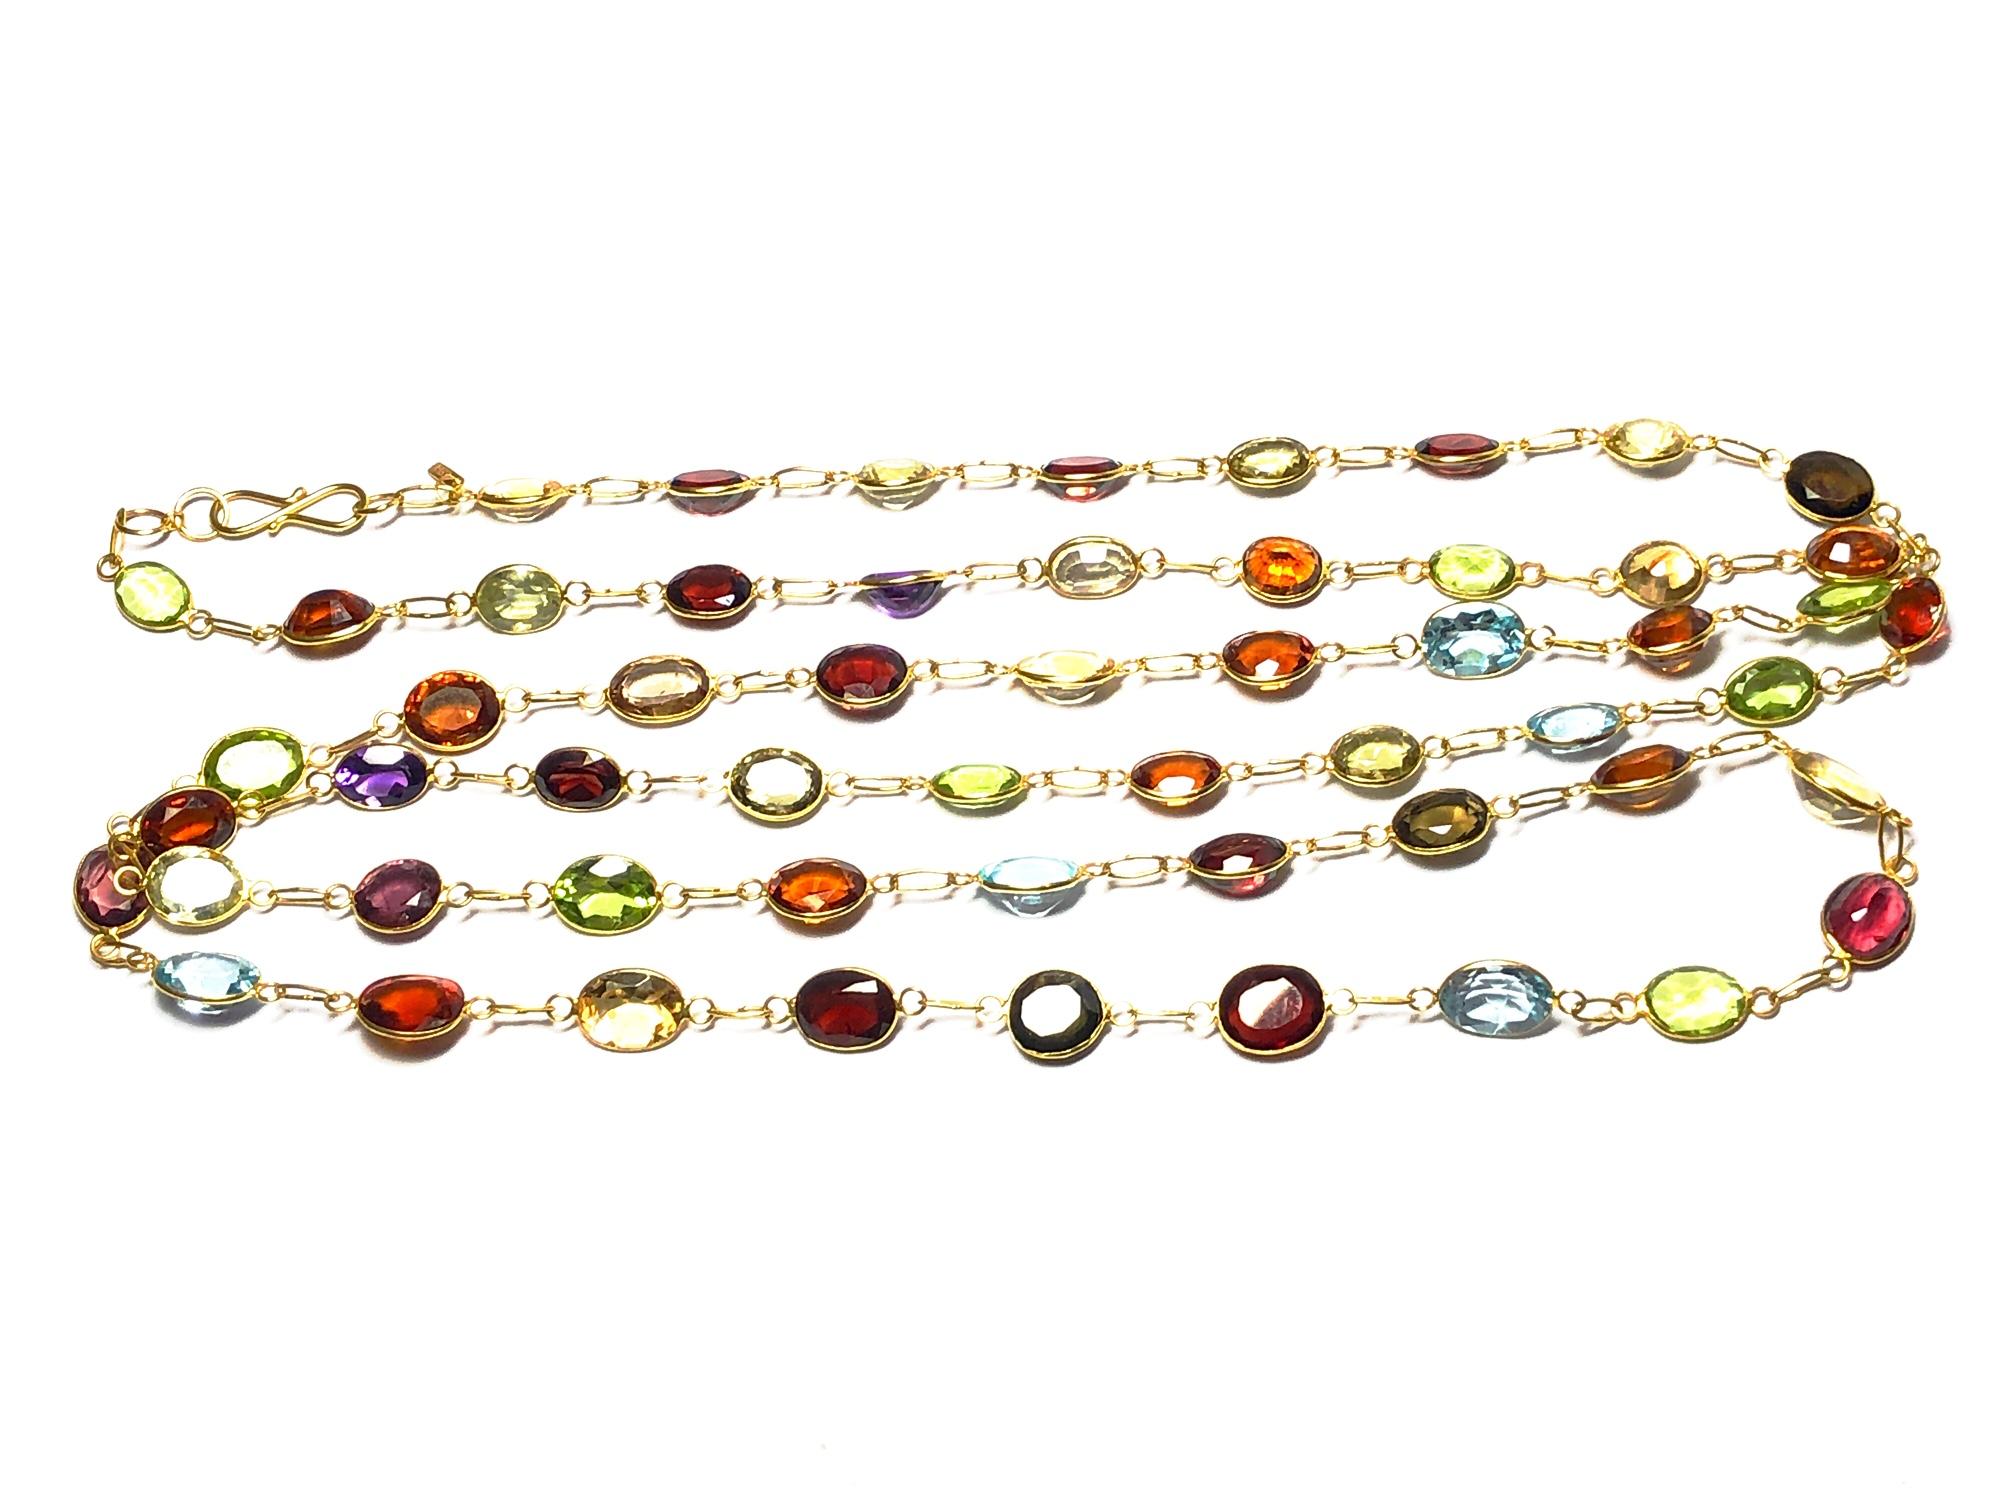 A Multi gem set necklace, with garnet, citrine, amethyst topaz and peridot, in a fine rubover setting, with chain link detail between, in 14ct yellow gold, with a figure of eight clasp, length approximately 90cm.